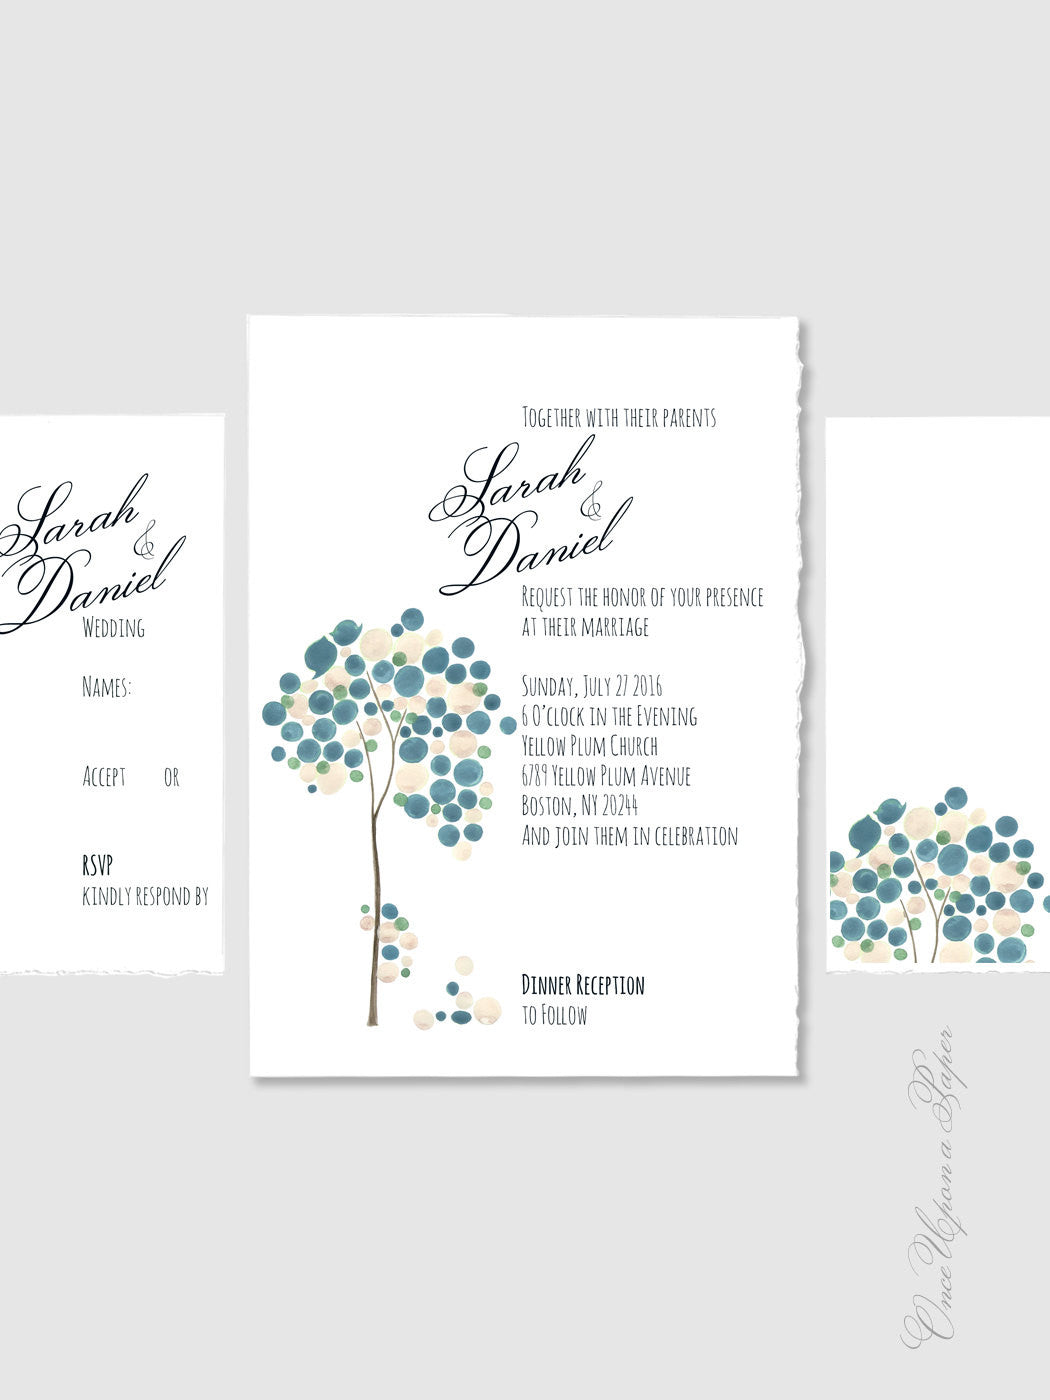 Custom Wedding Suite Package Printable - Save the Date, Wedding Invitations, RSVP, Thank You Cards